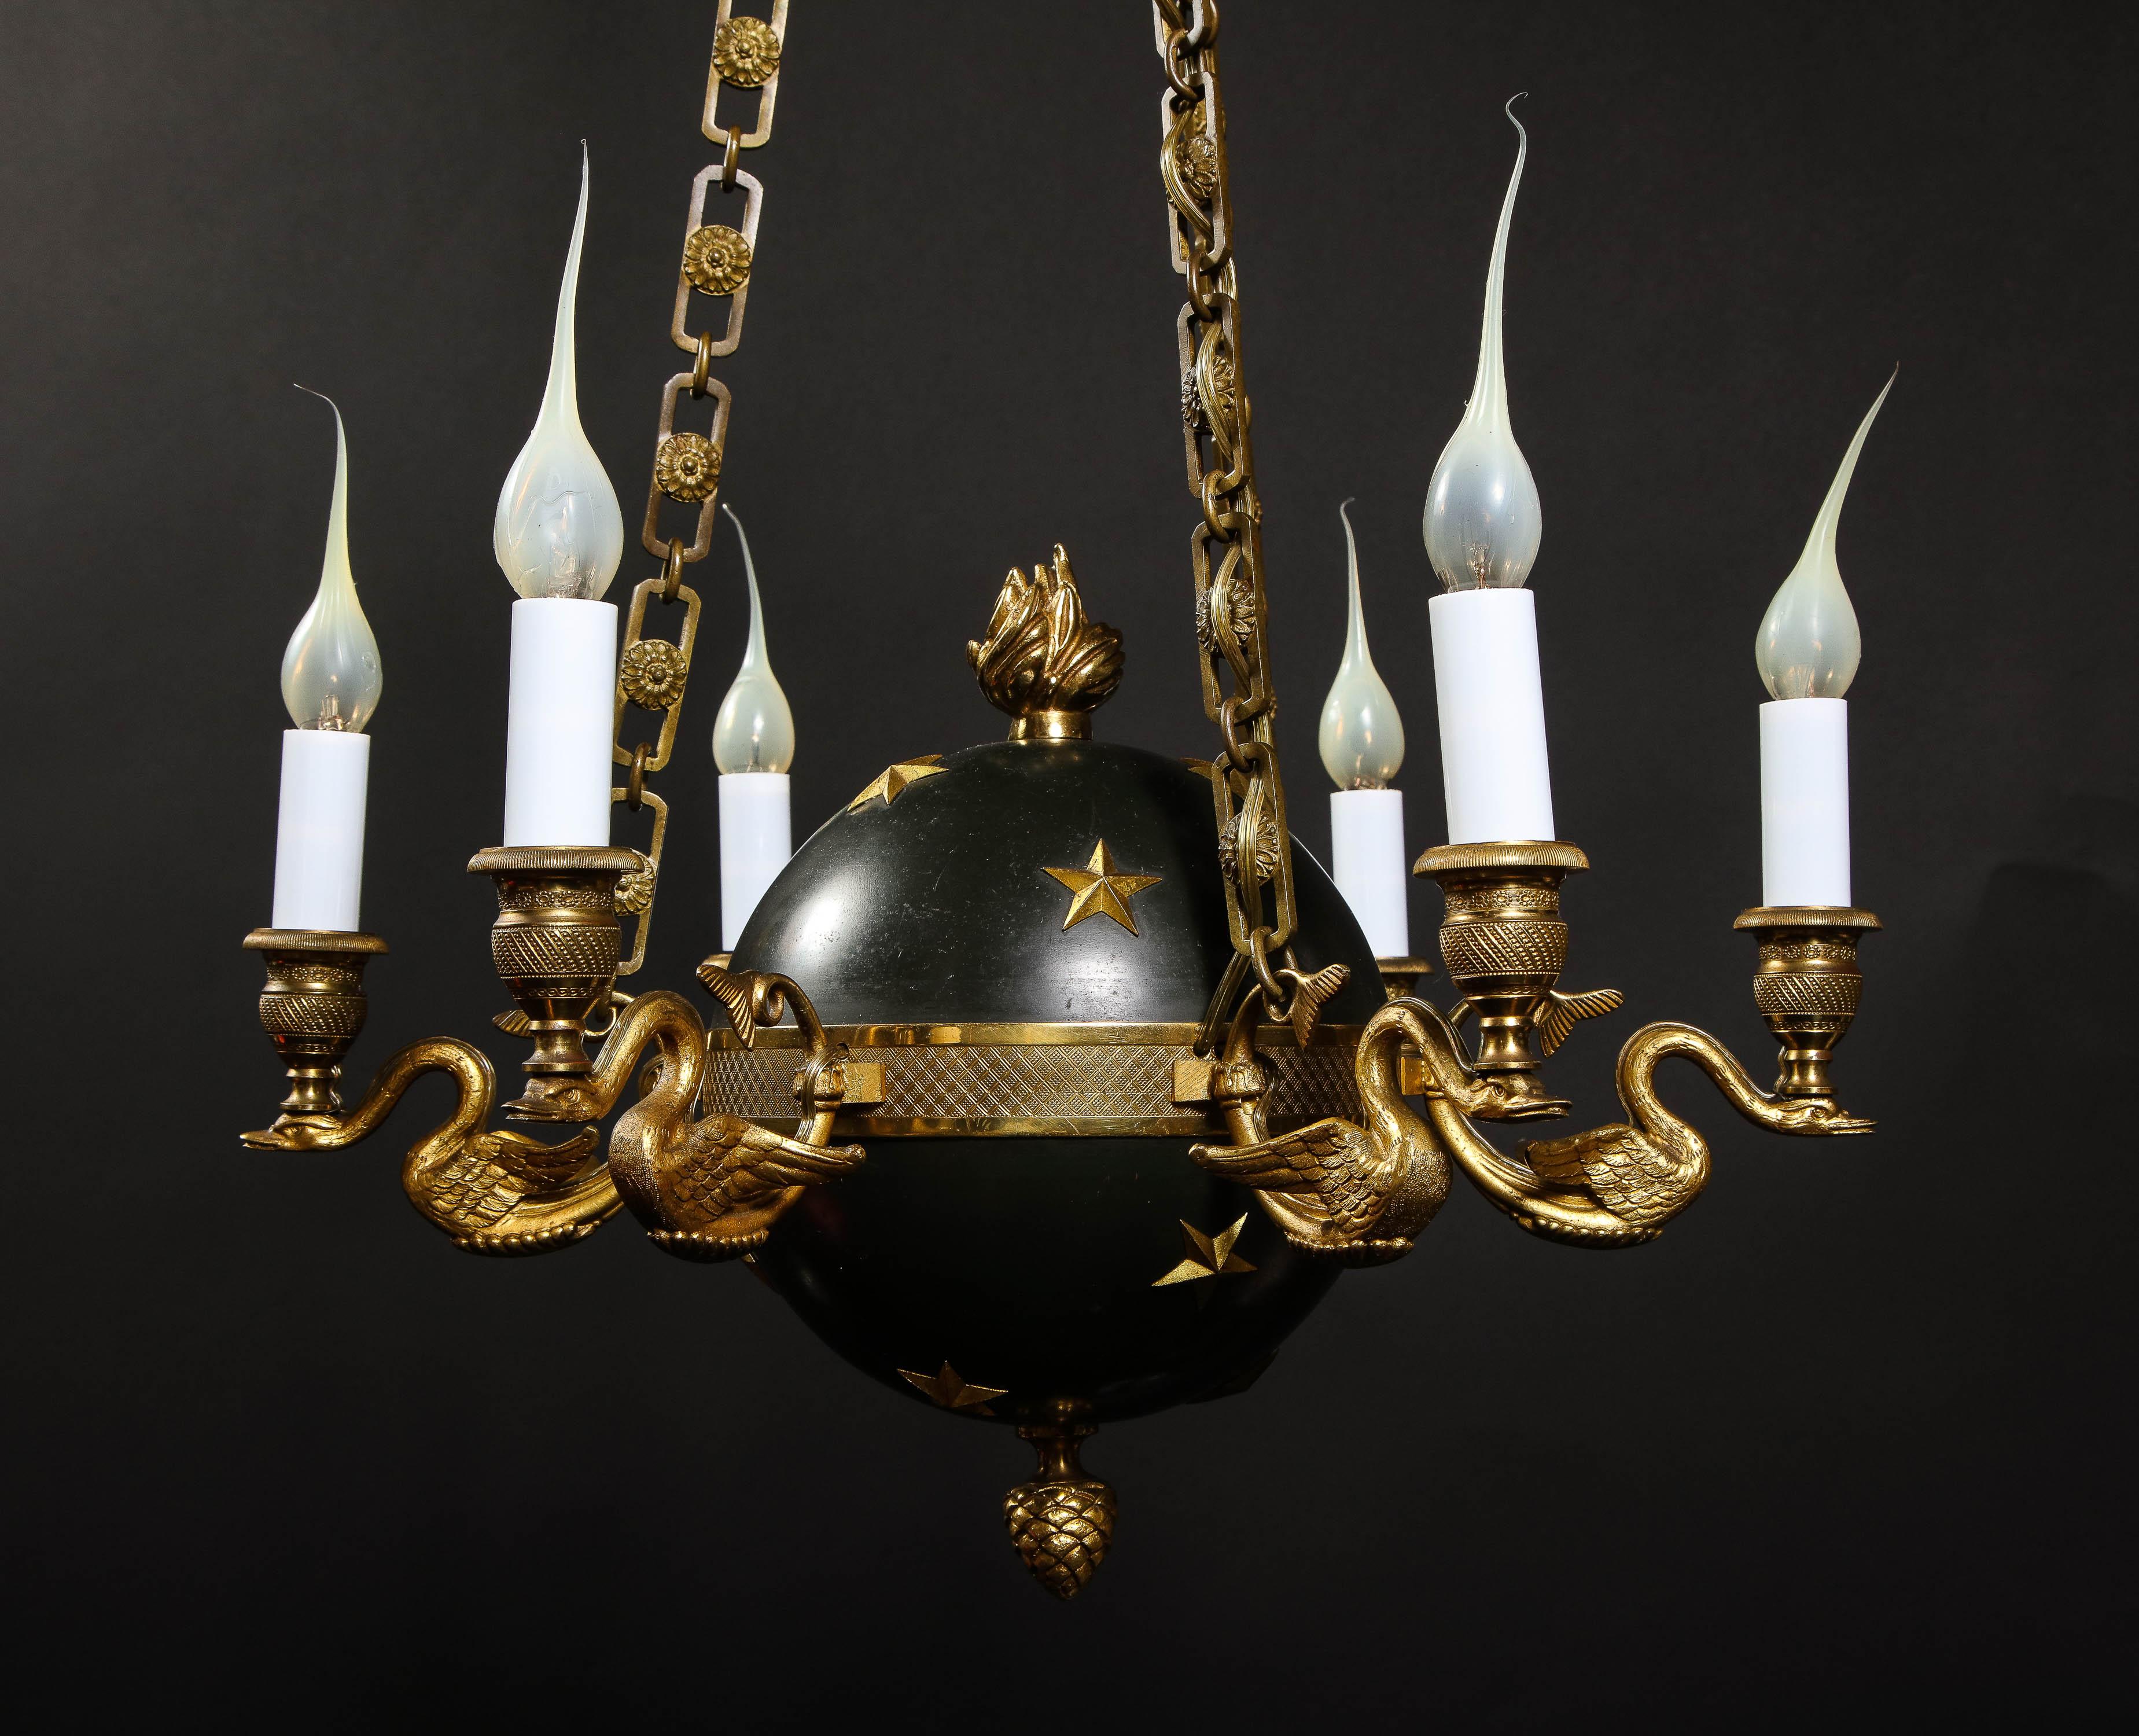 Hollywood Regency Gilt Bronze and Patinated Bronze Ball Form Swan Chandelier For Sale 7